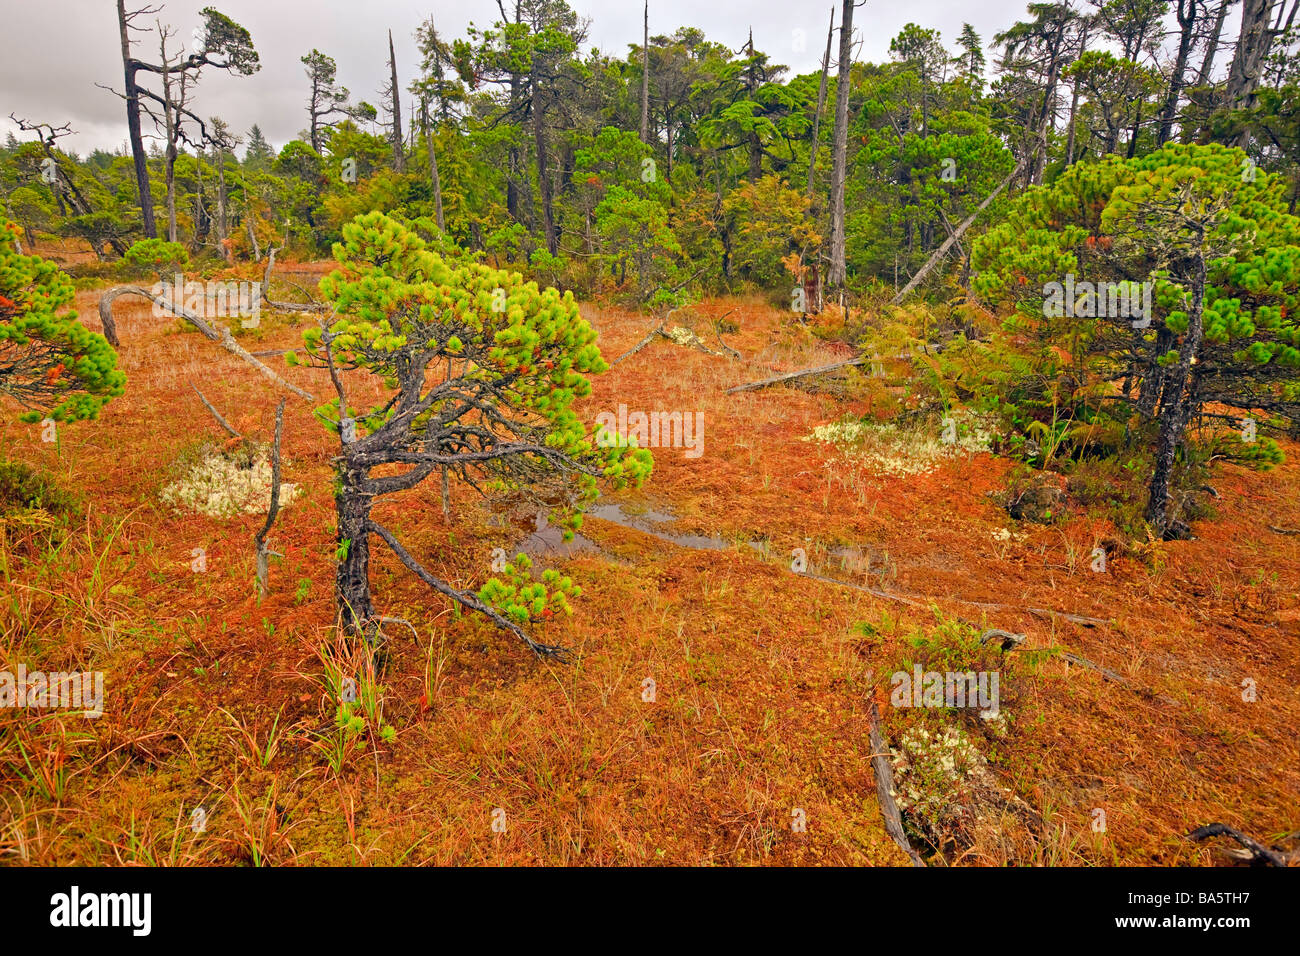 Distorted Shore Pine trees Pinus contorta var contorta and Sphagnum moss Sphagnum cymbifolium growing in the bog along the Shore Stock Photo